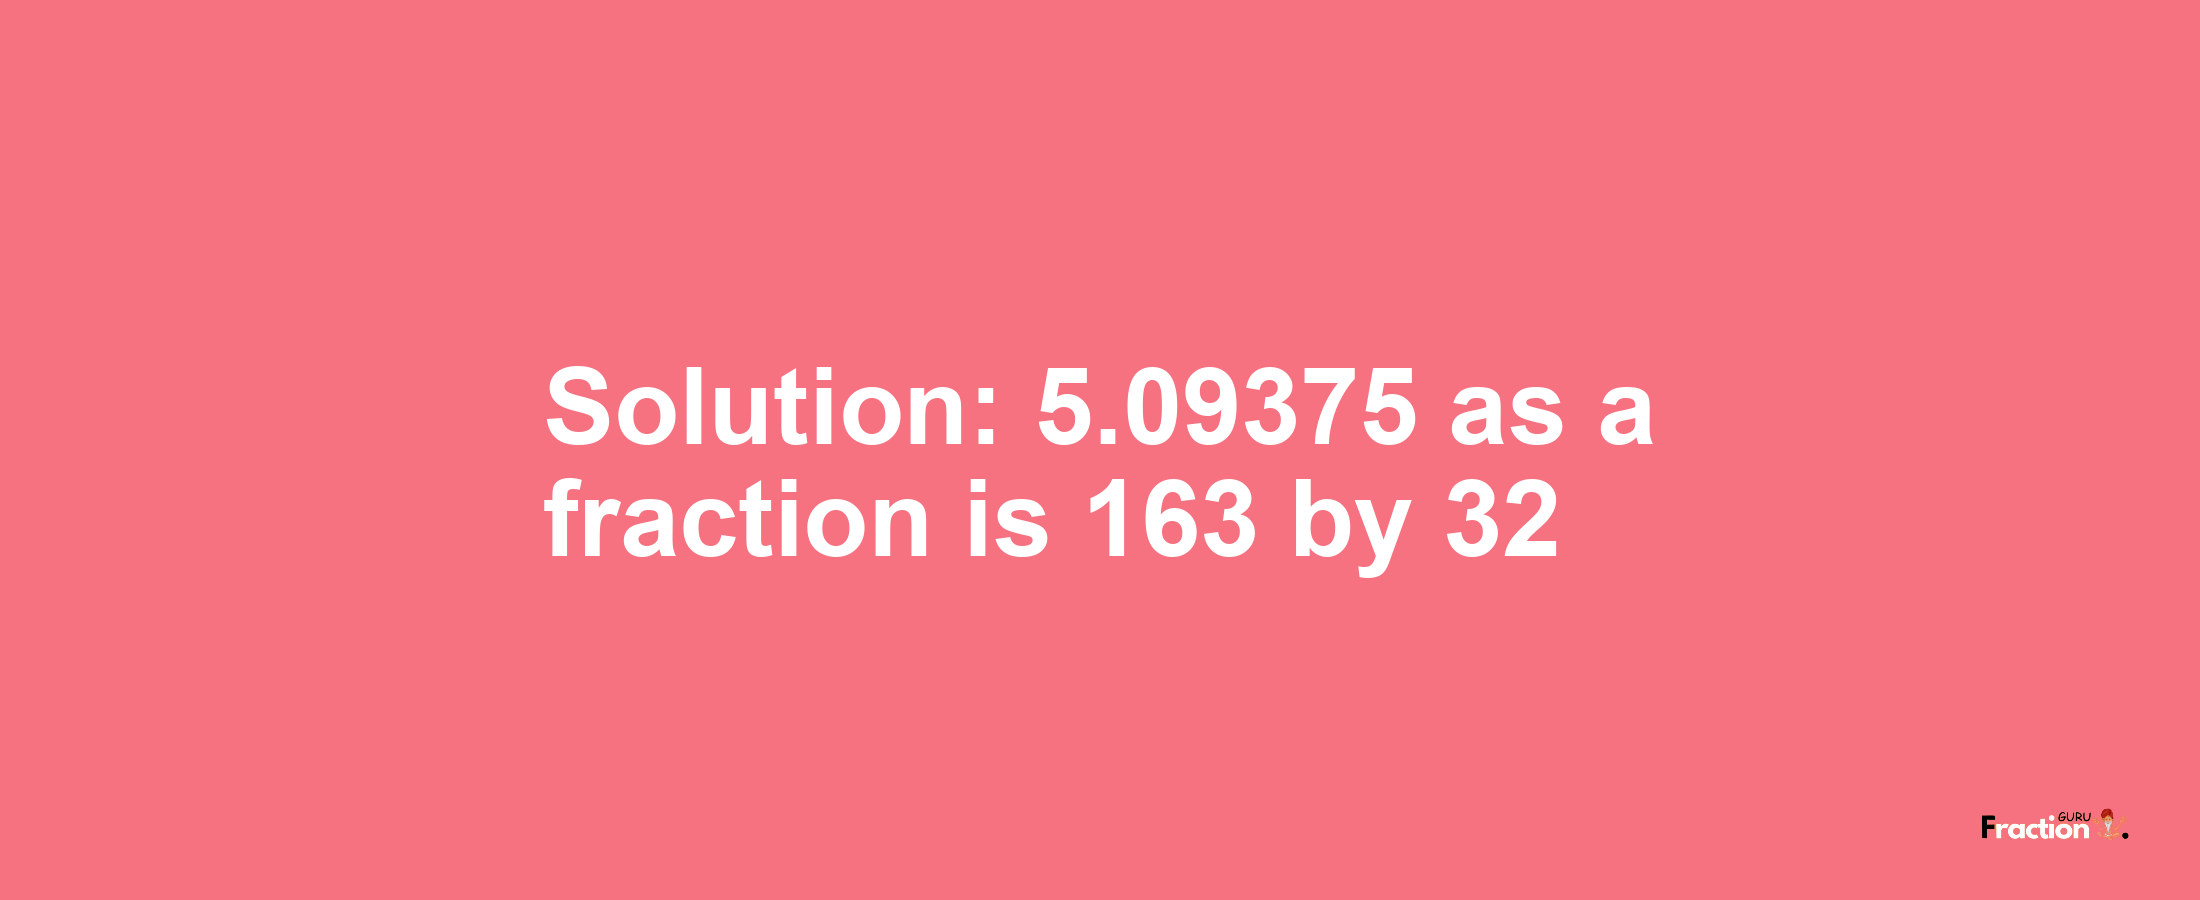 Solution:5.09375 as a fraction is 163/32